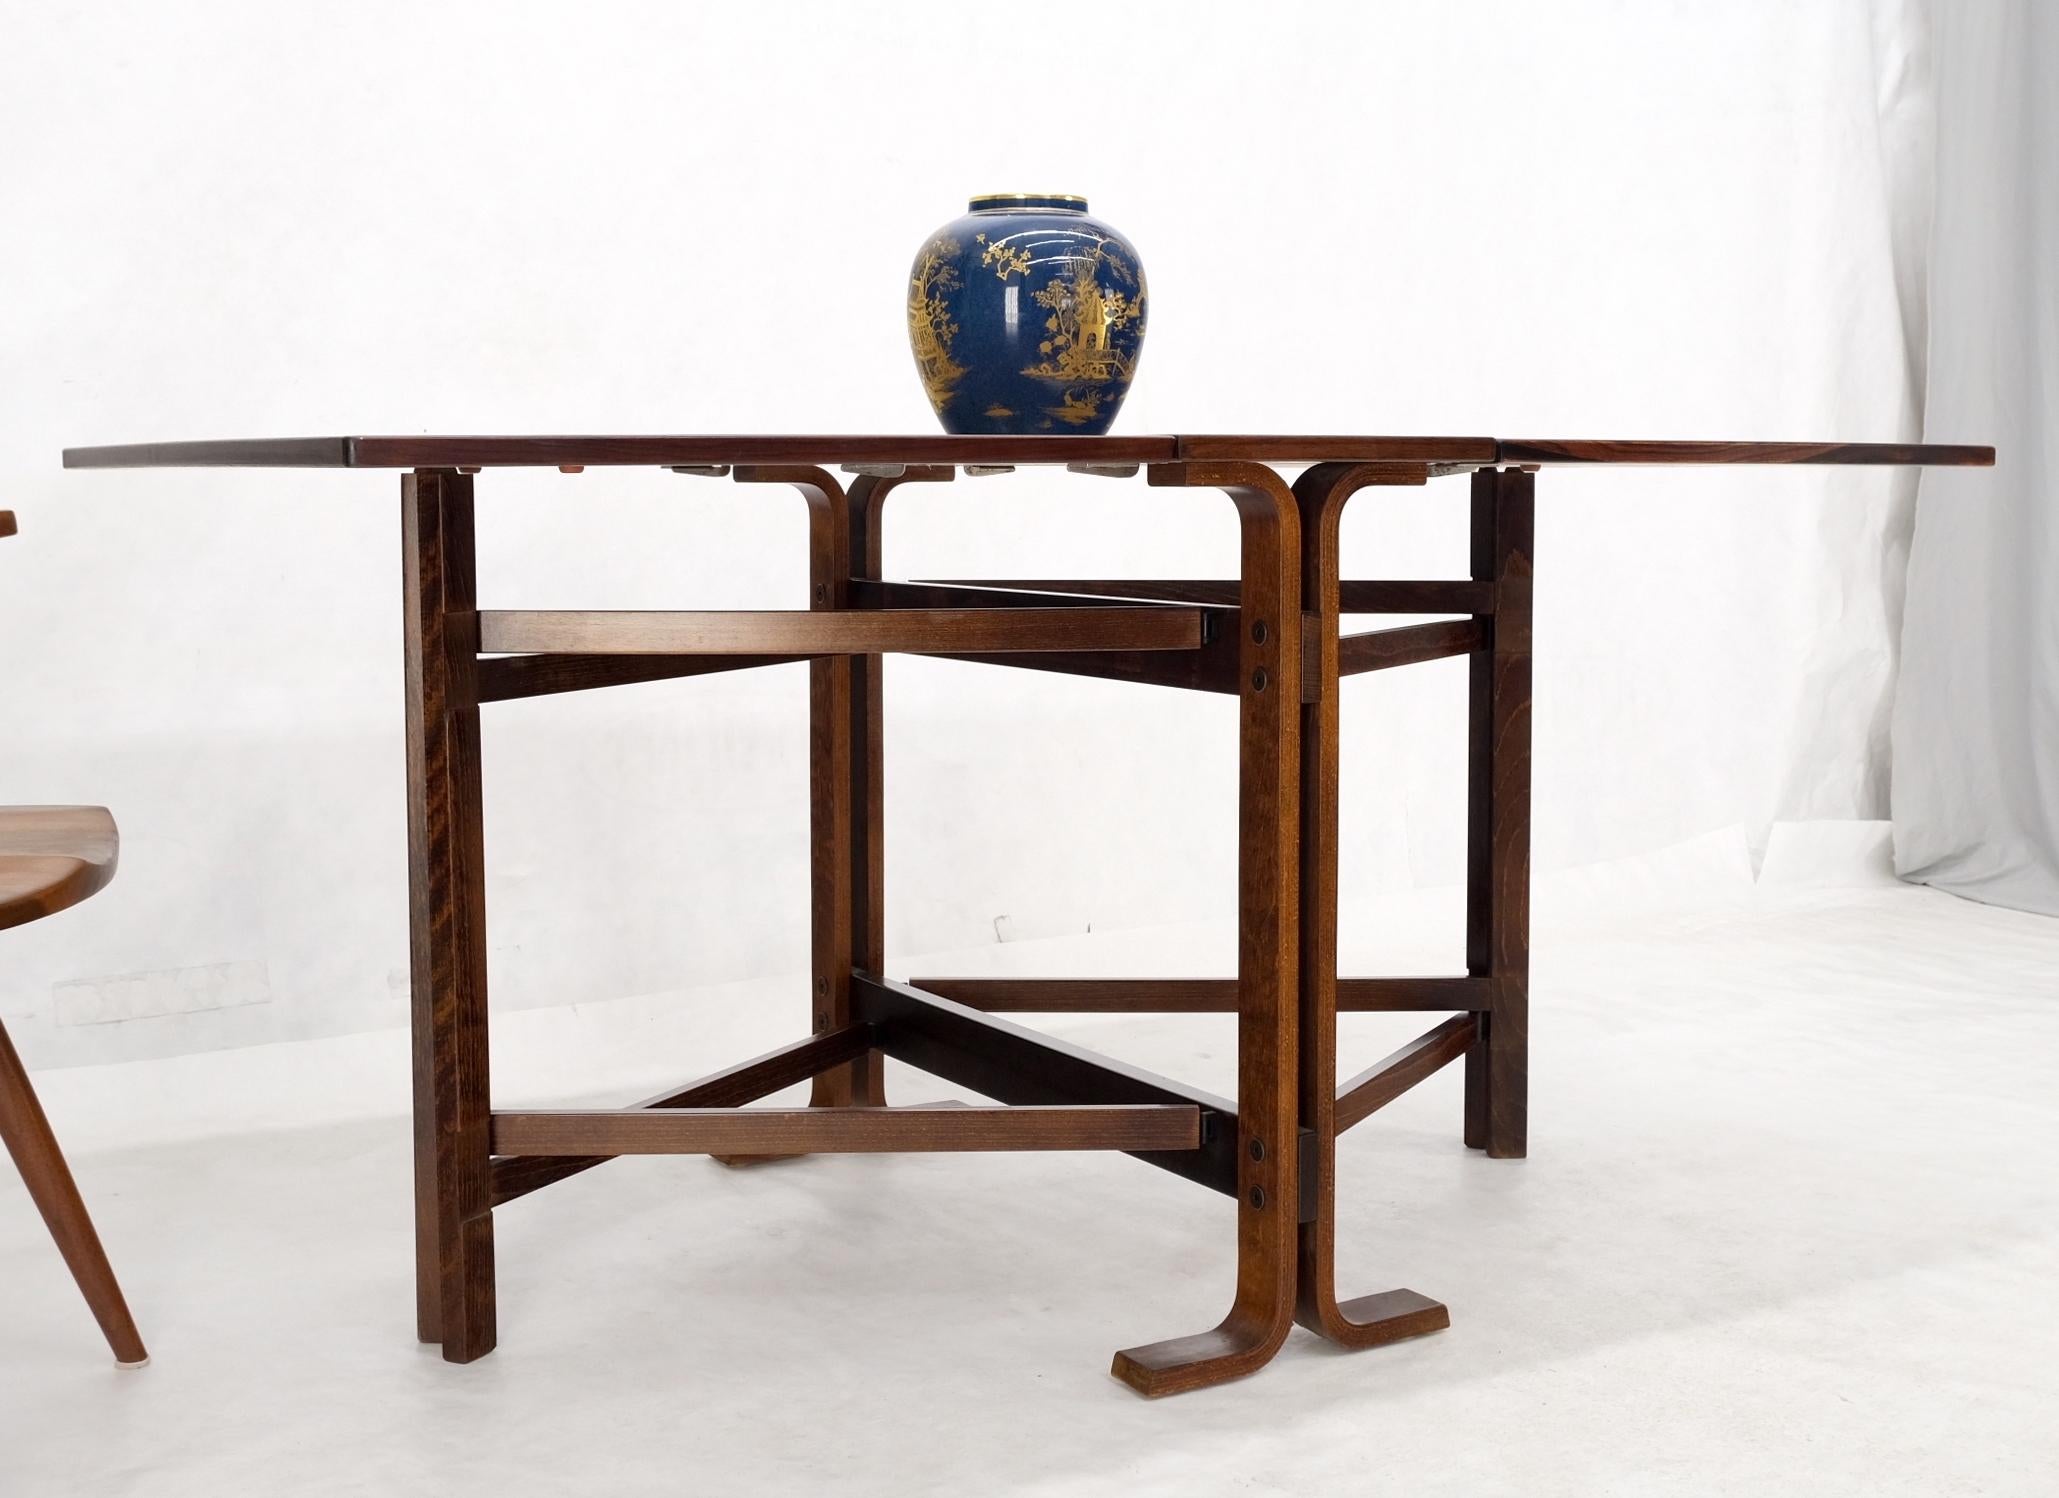 Norwegian Made in Norway Danish Modern Bent Rosewood Plywood Legs Drop Leaf Dining Table For Sale